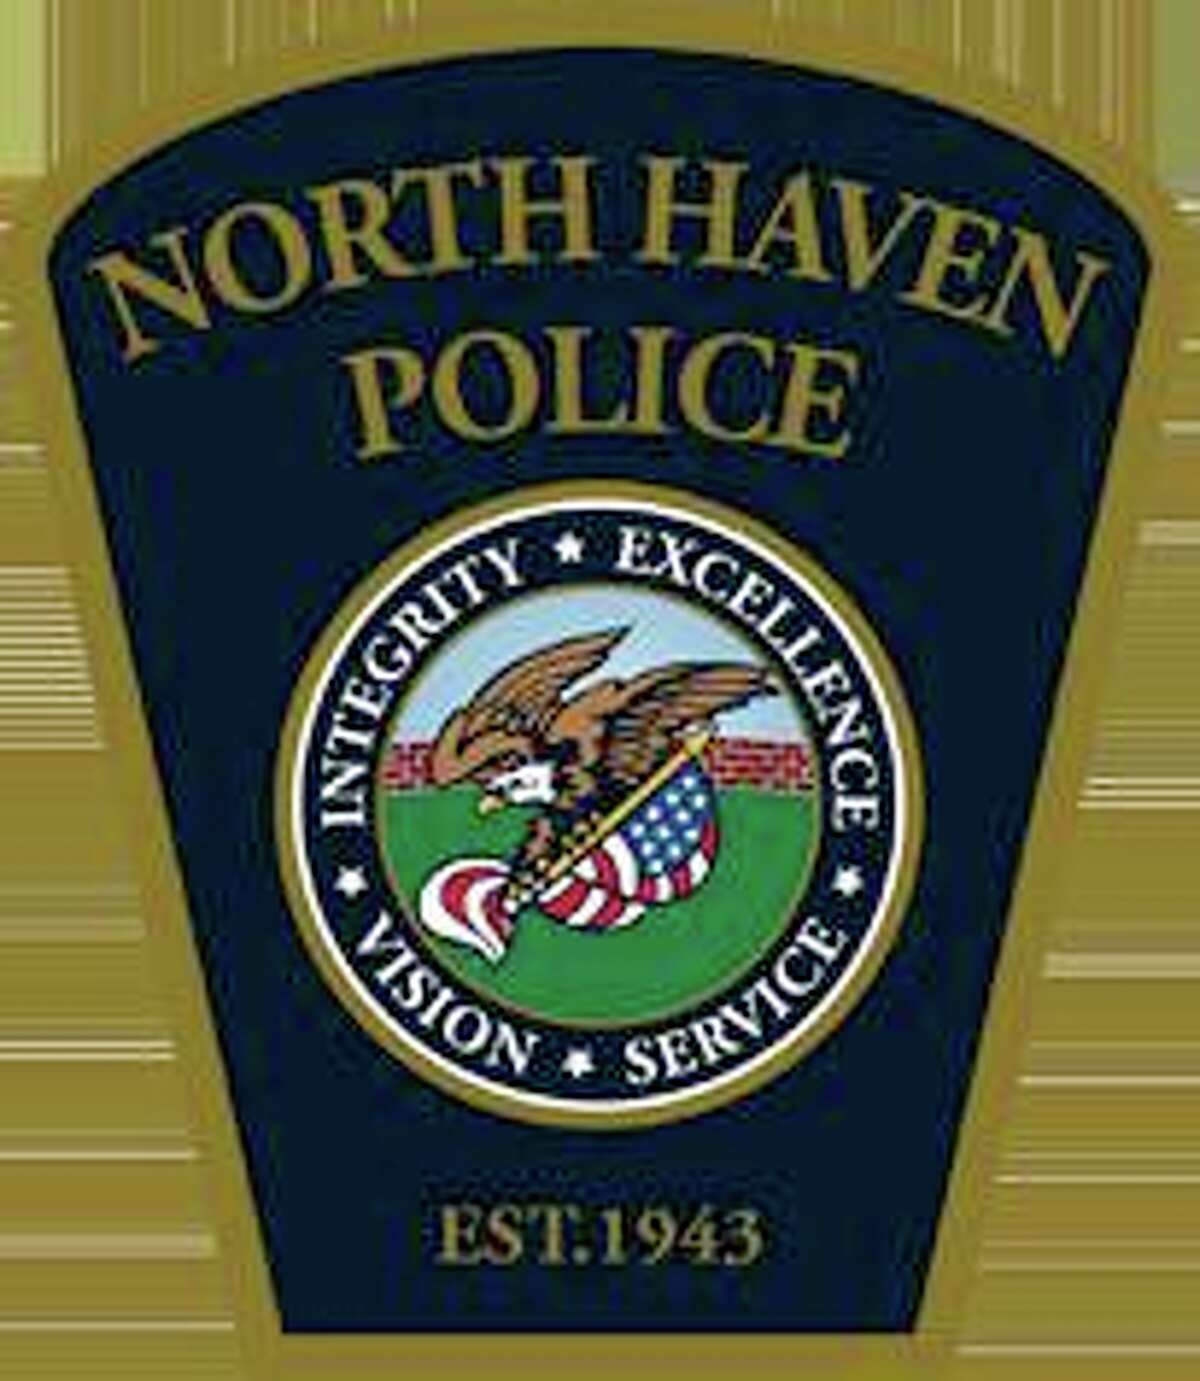 A 31-year-old Northford man struck a tree while driving on Middletown Avenue in North Haven early Friday morning, police said.